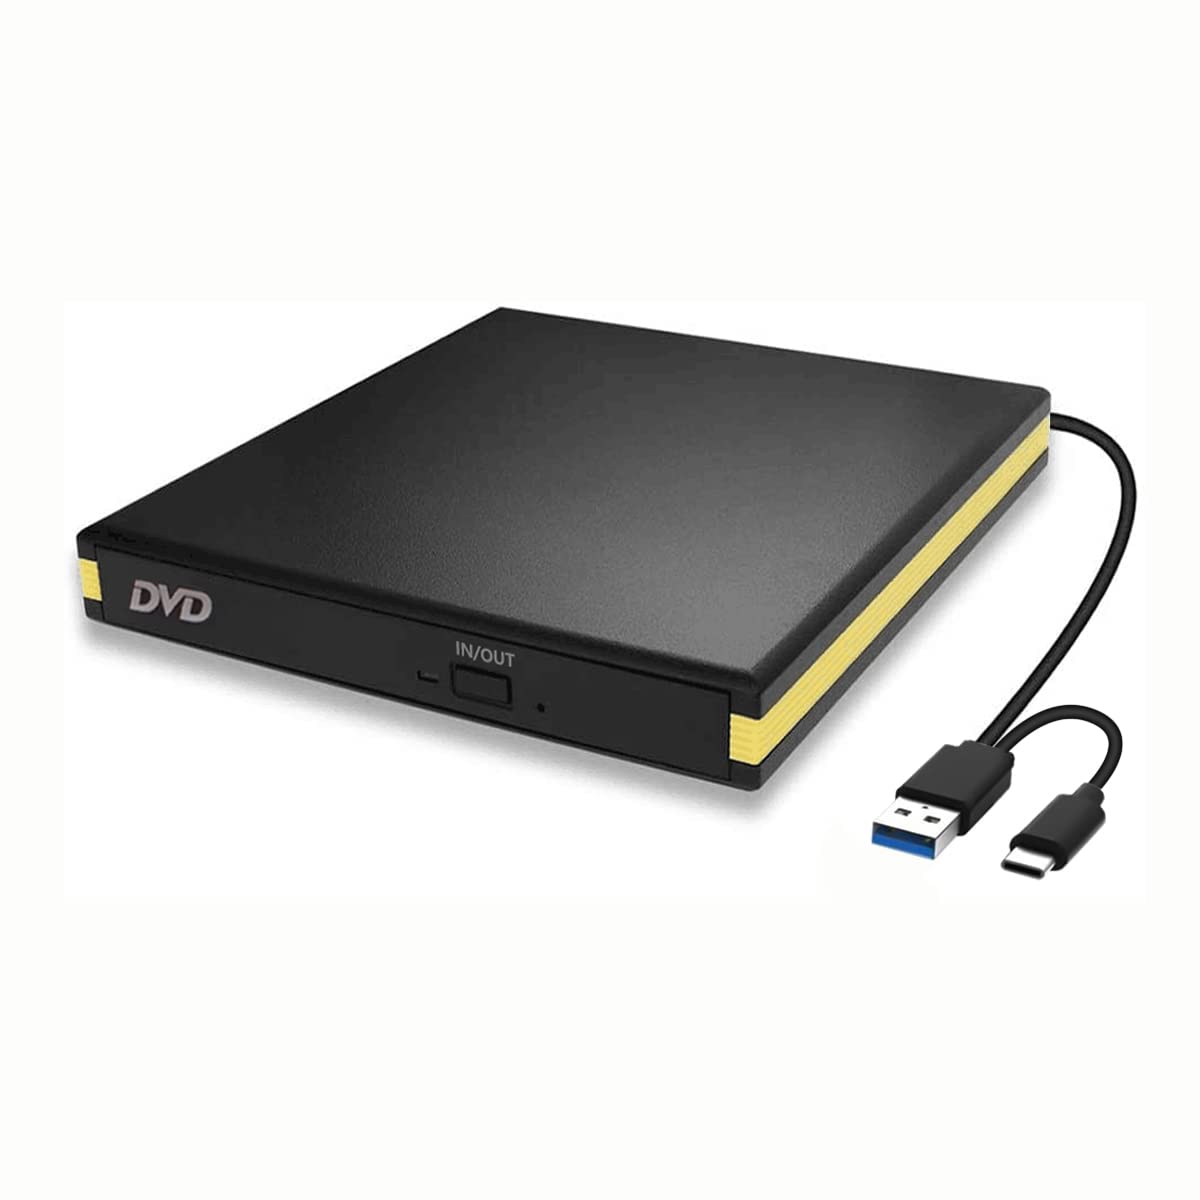 Look for the CD/DVD drive under the DVD/CD-ROM drives category 
 If the drive is listed with an error or is not listed at all, there may be a problem with the drive or the connection